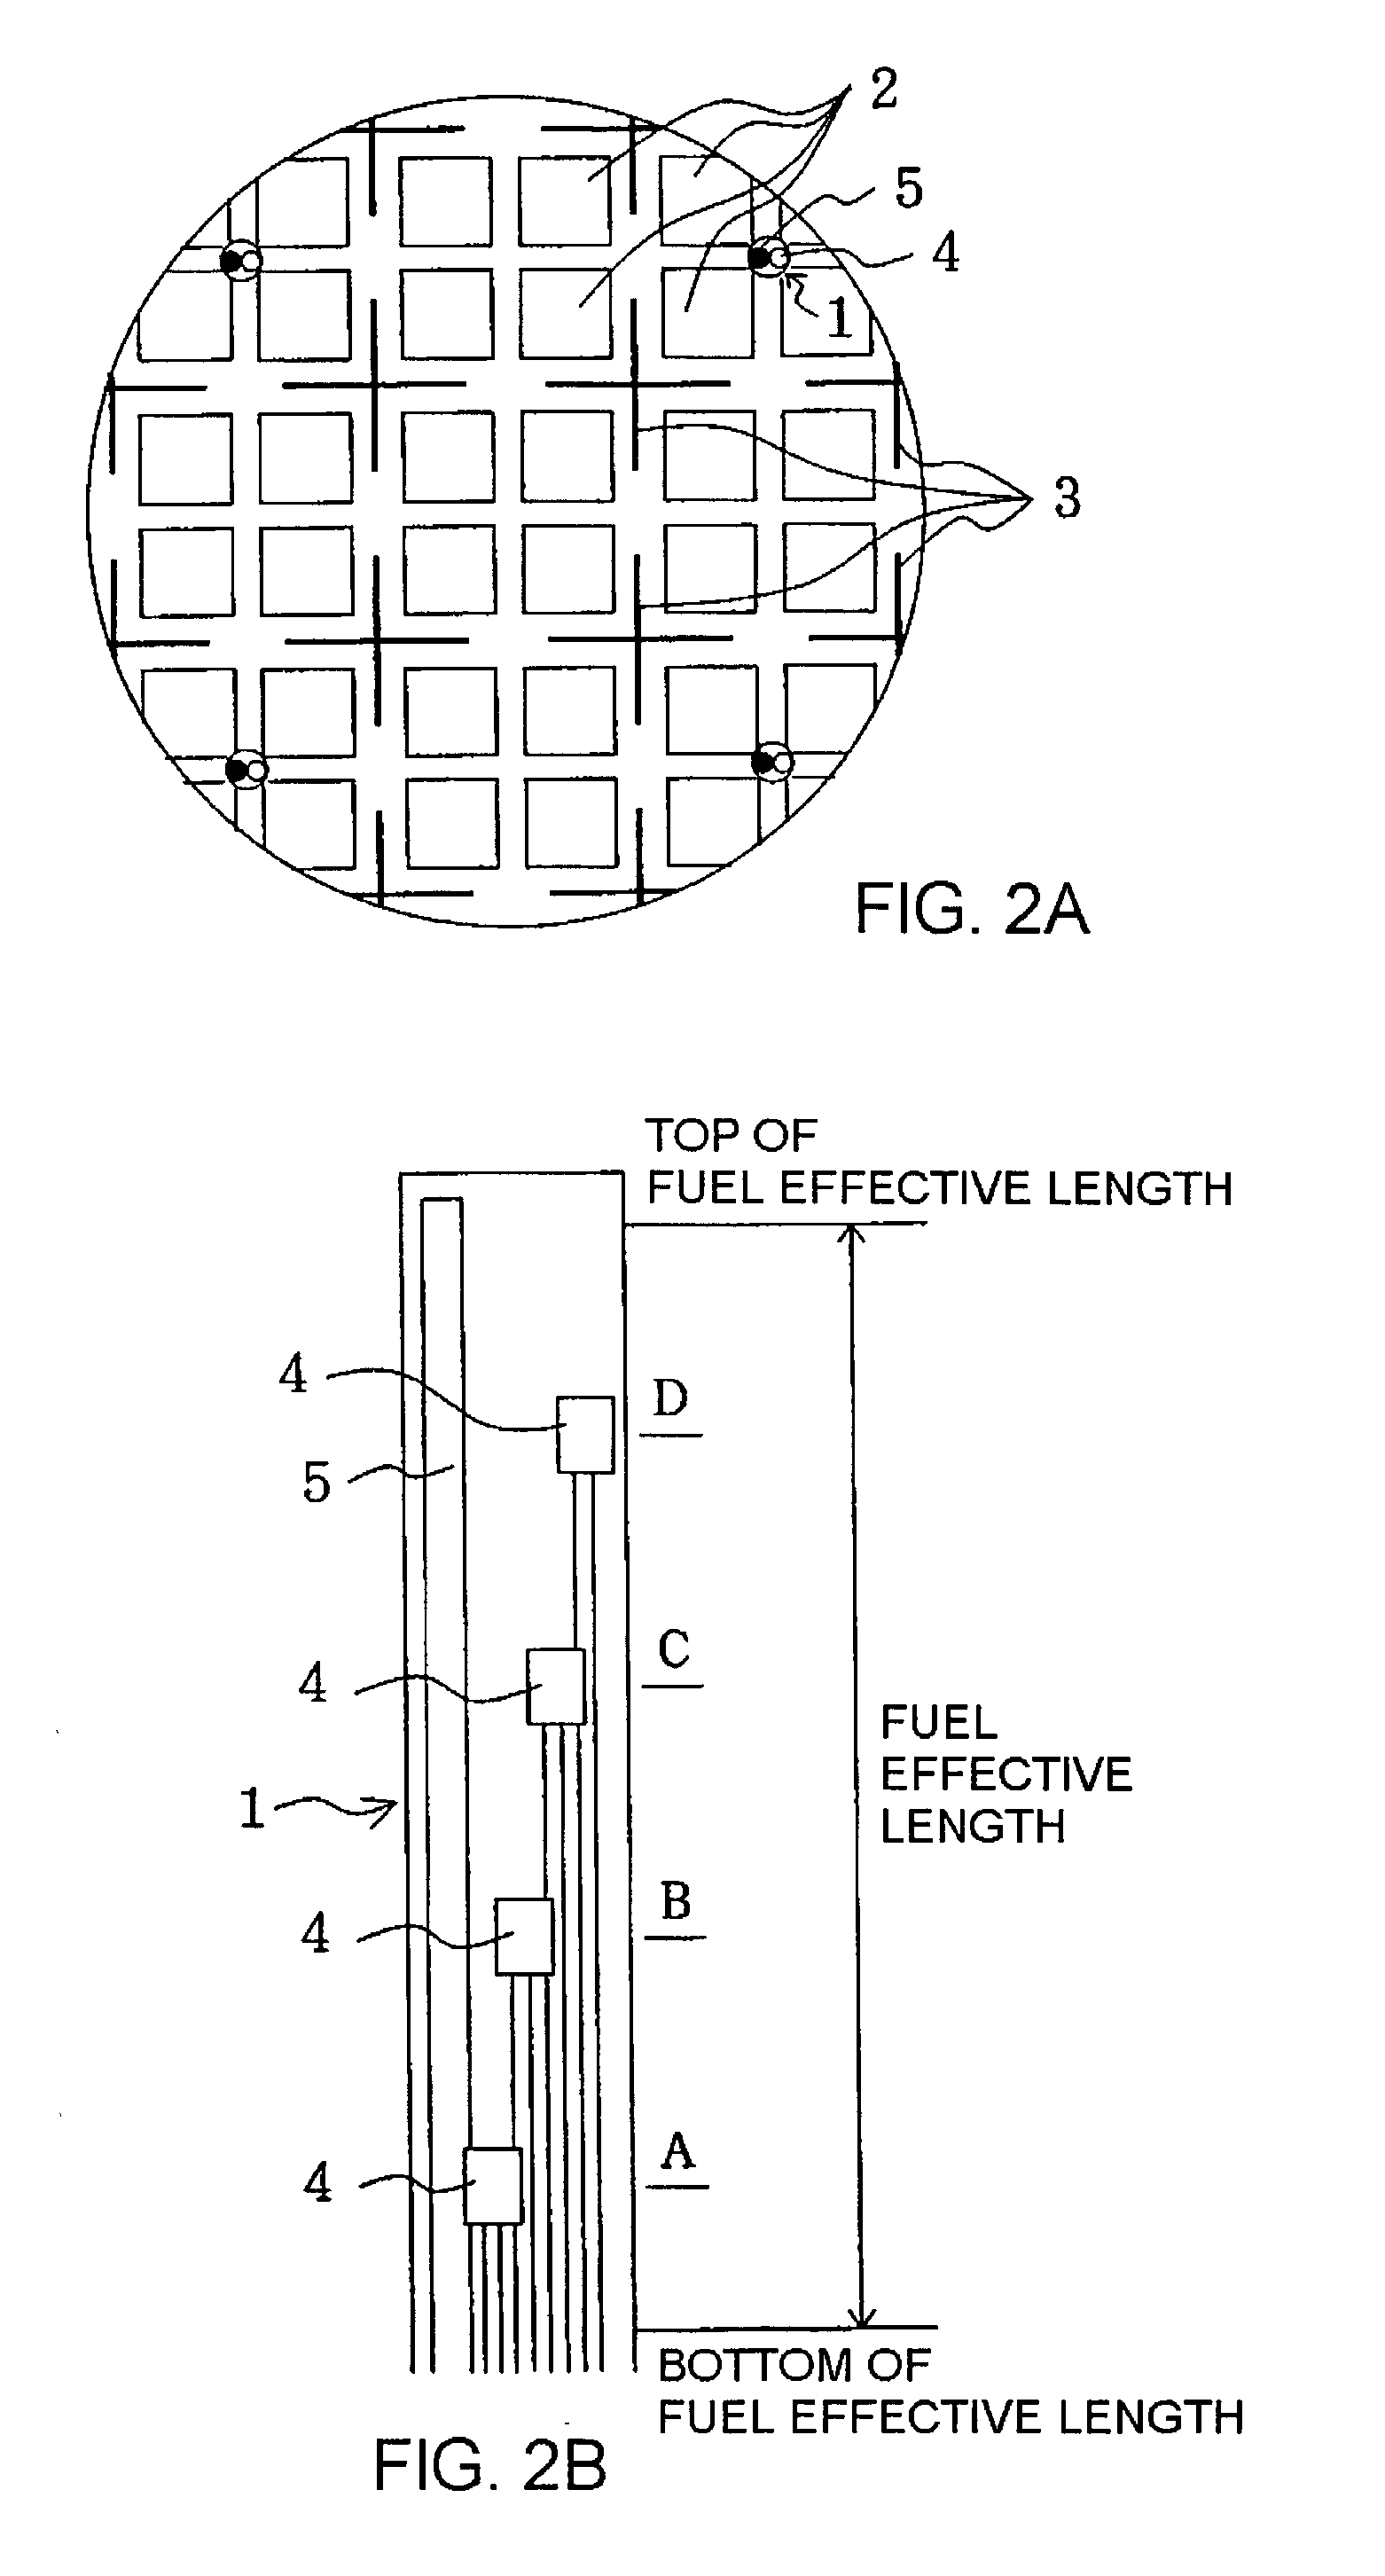 Incore monitoring method and incore monitoring equipment